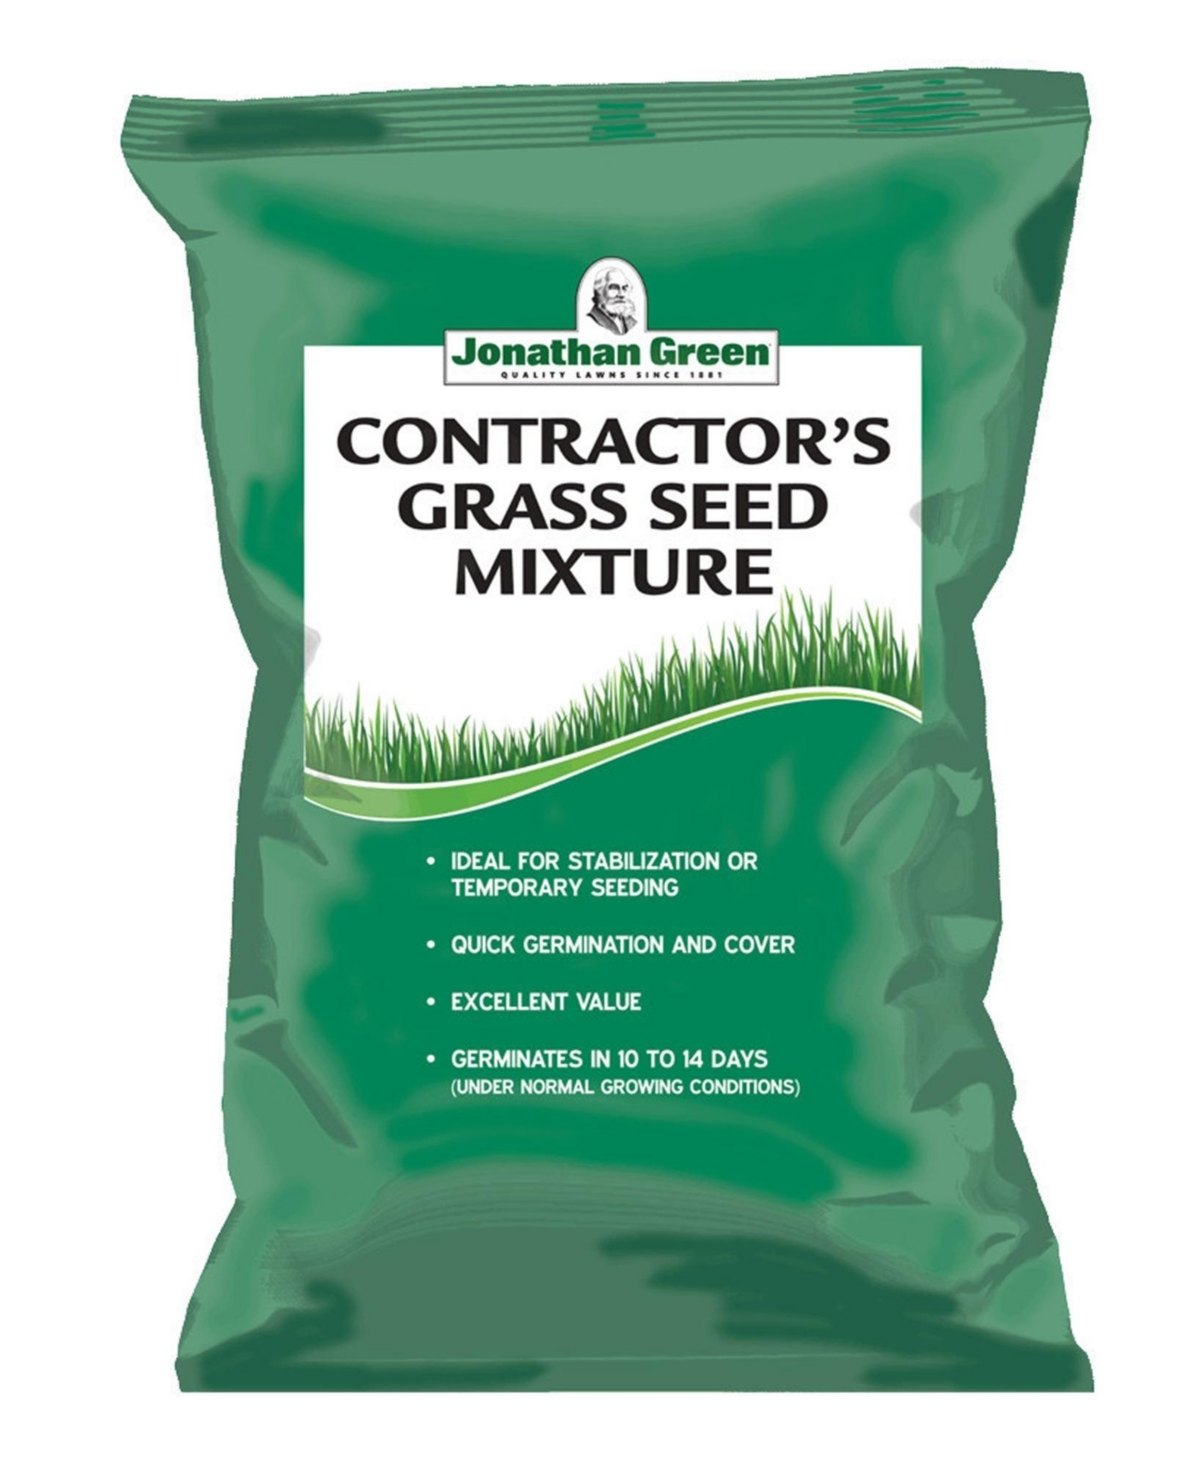 (#11460) Contractor's Grass Seed Mix - 50# bag - Brown